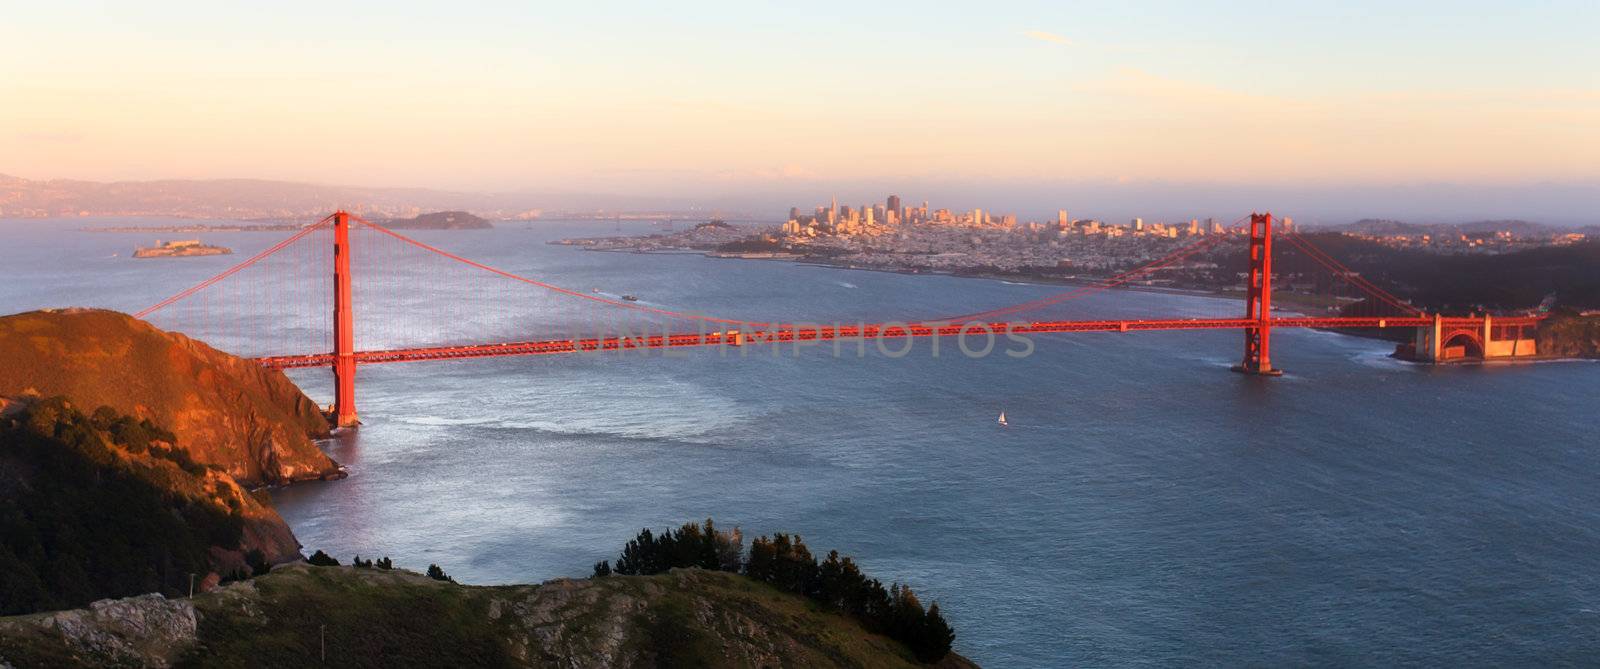 Sunset Panoramic View of the Golden Gate Bridge from the Peak of Hawk Hill